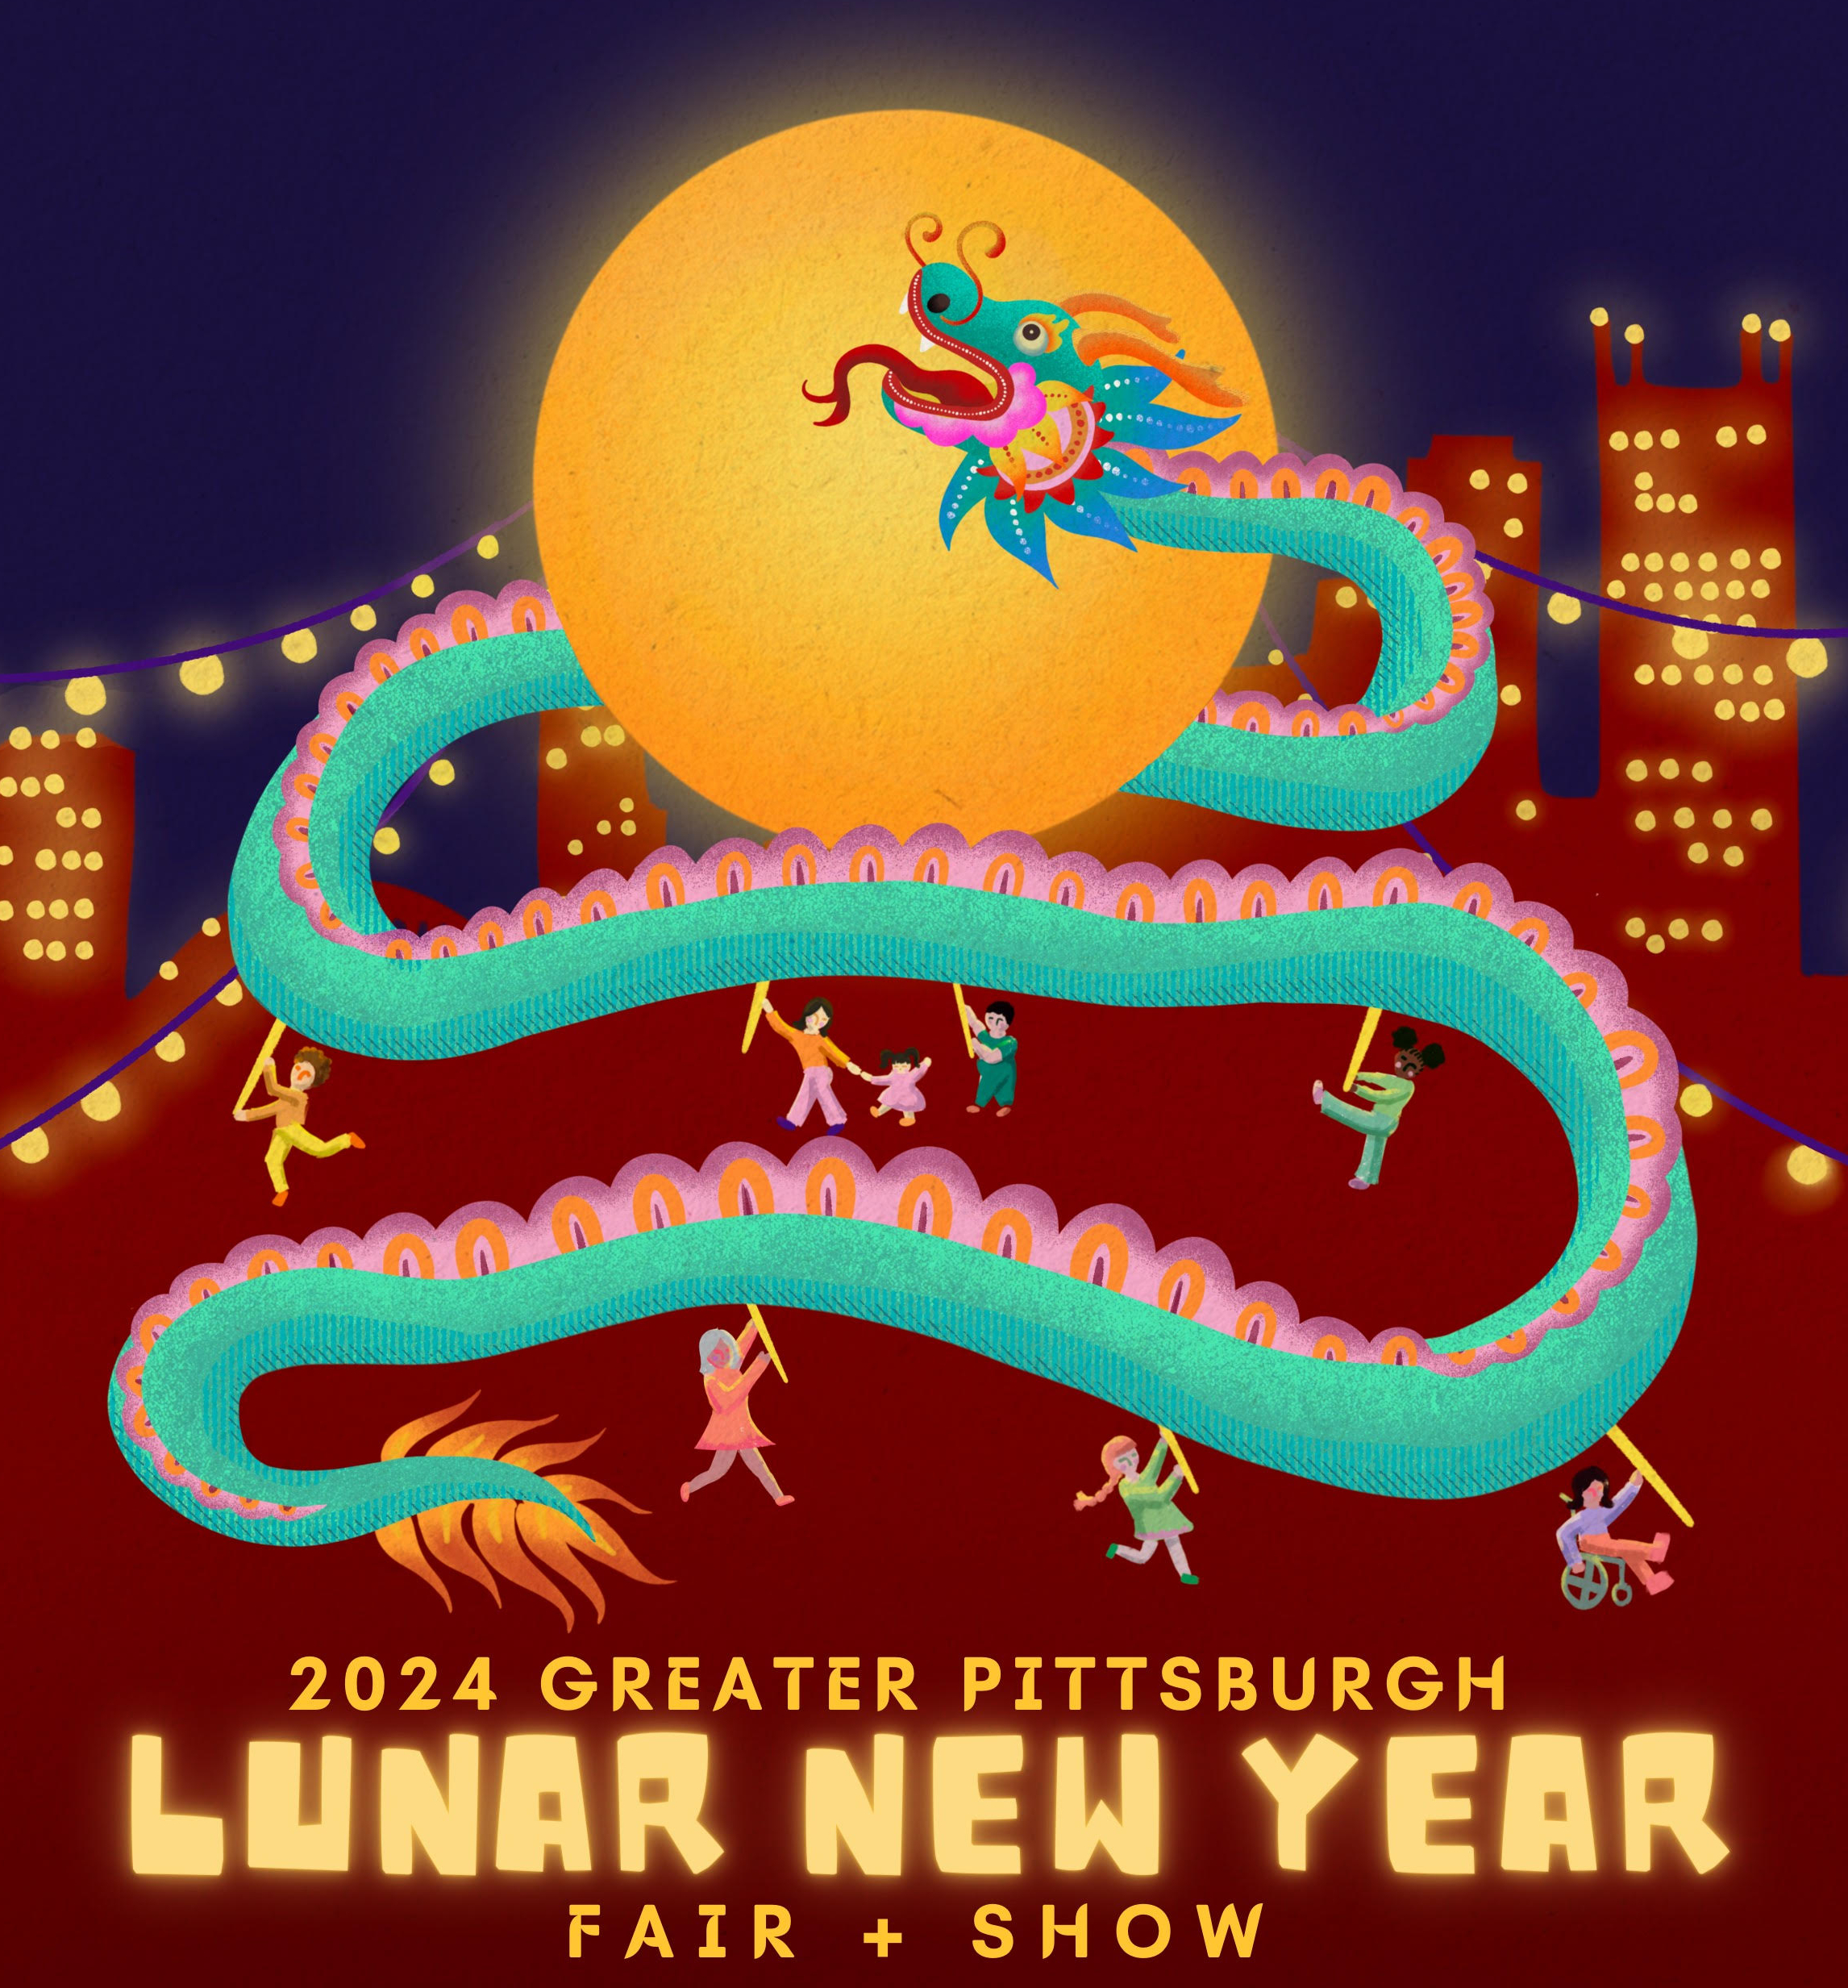 A graphic with a dragon weaving through the PIttsburgh Skyline with the text: 2024 Greater Pittsburgh Lunar New Year Fair + Show